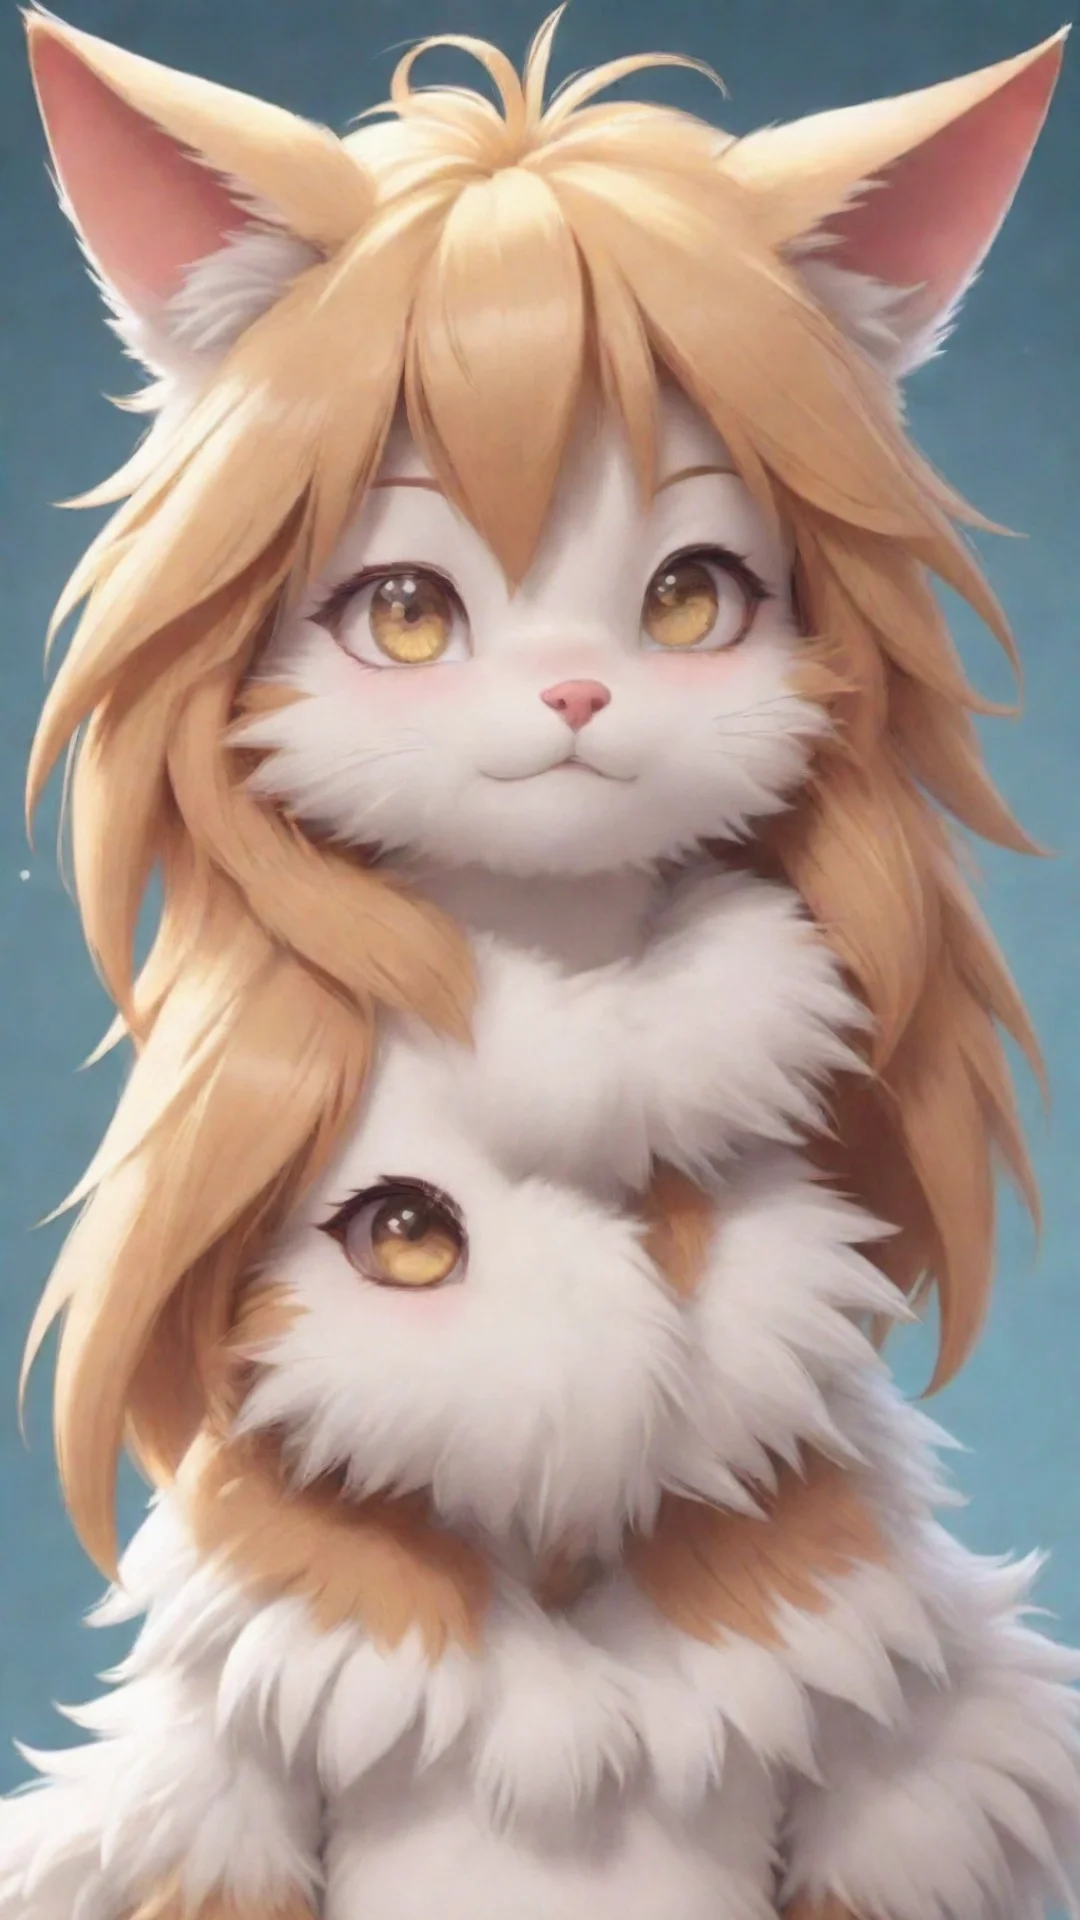 trending furry cute in anime style good looking fantastic 1 tall